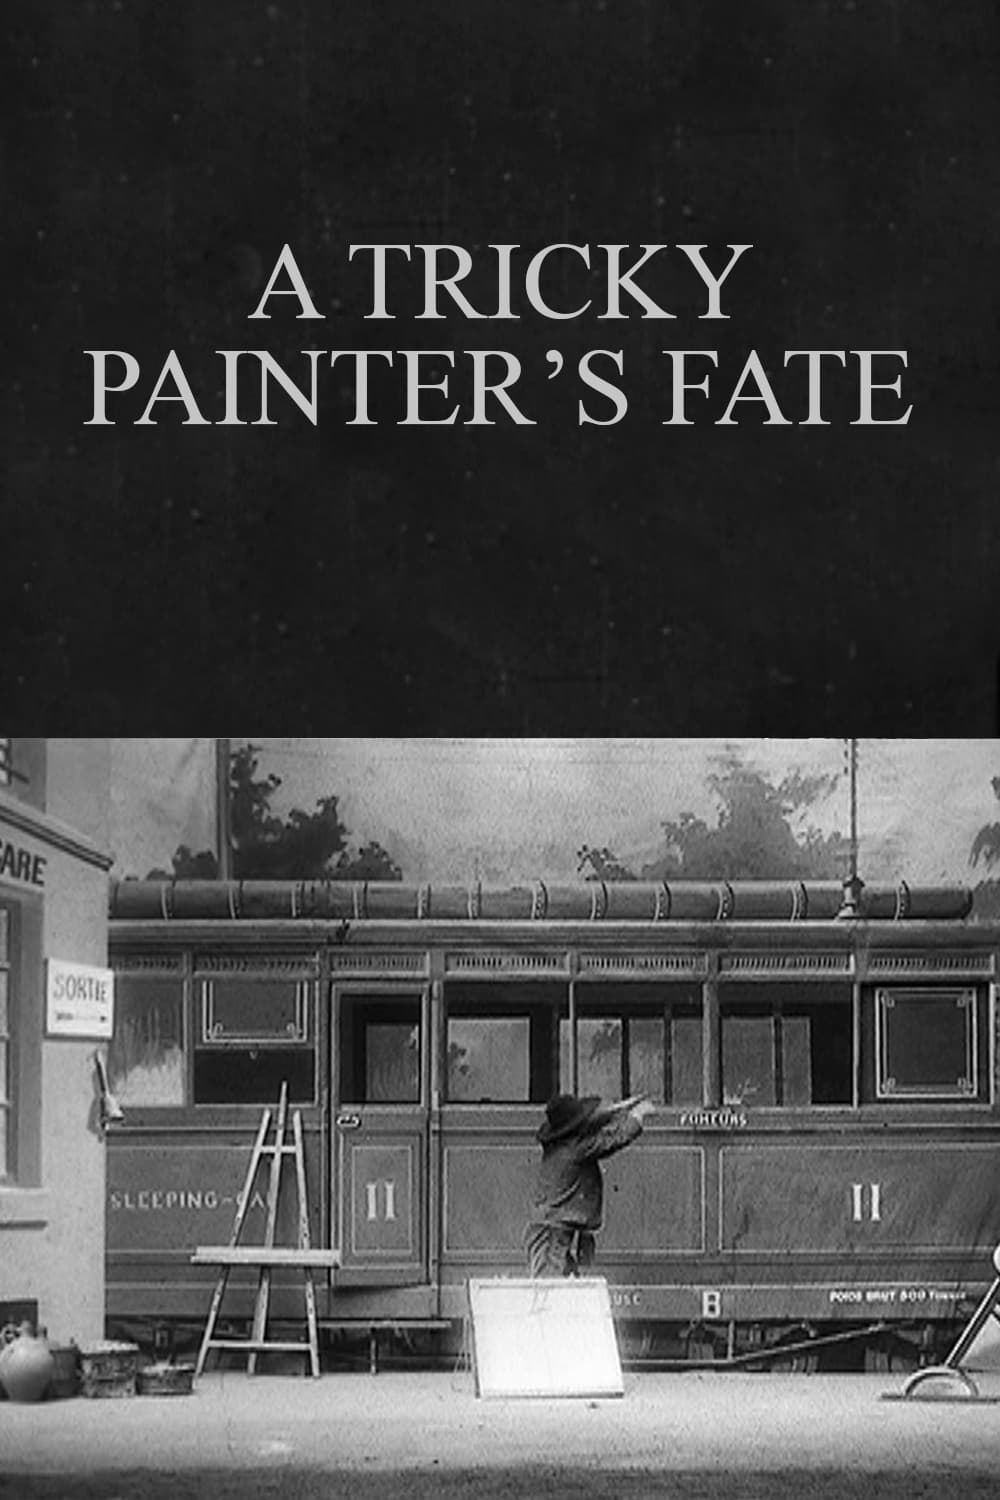 A Tricky Painter’s Fate